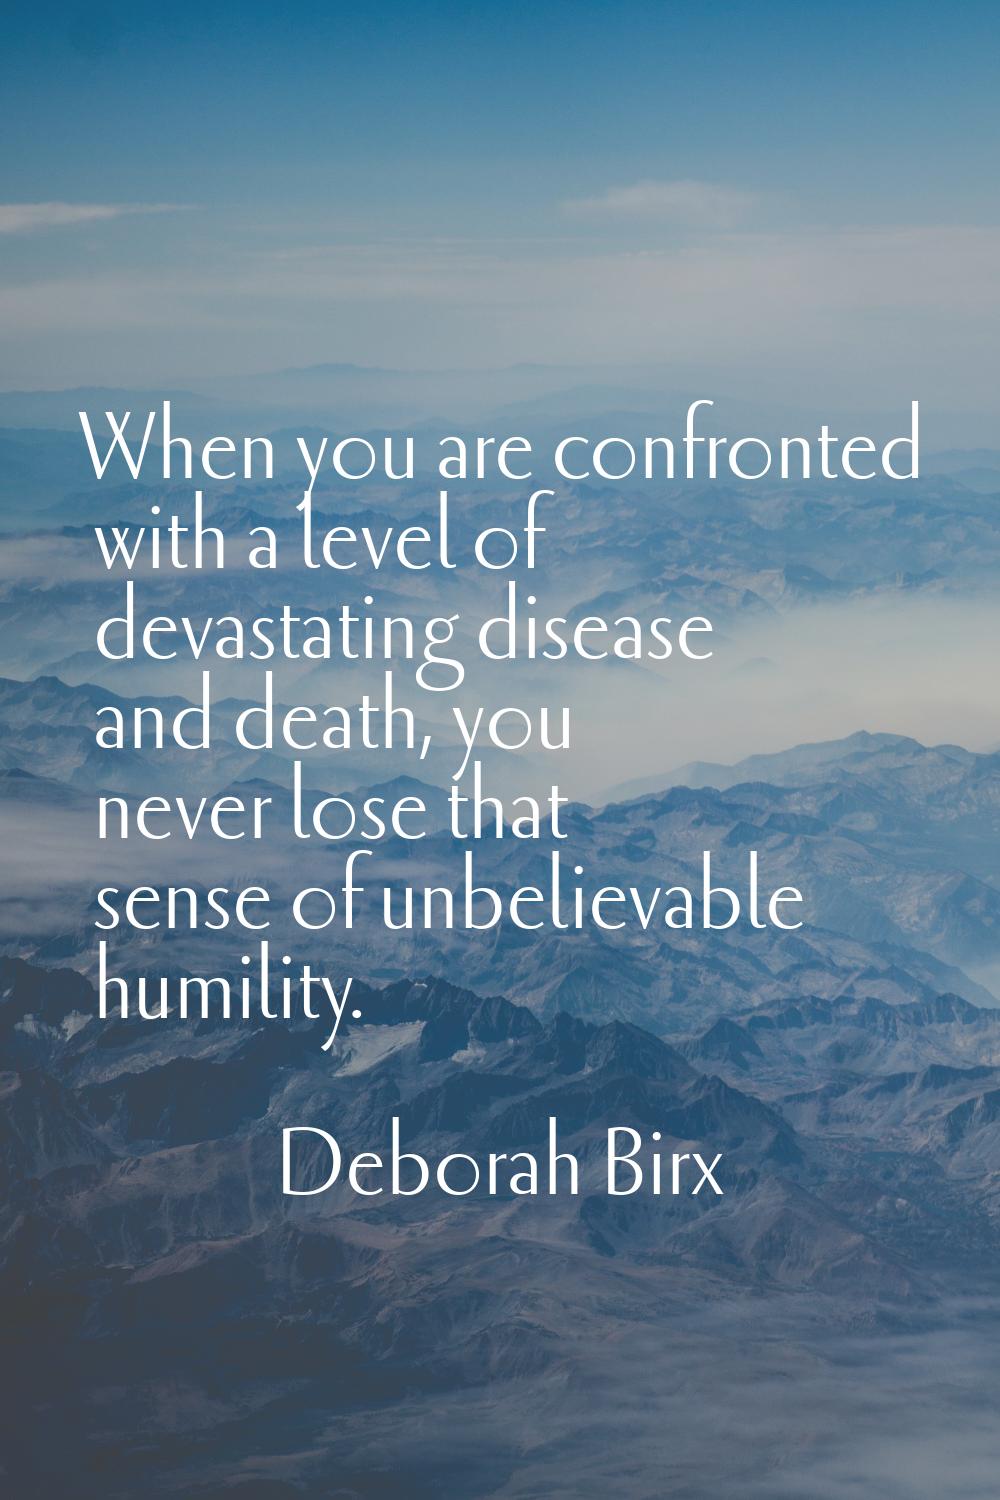 When you are confronted with a level of devastating disease and death, you never lose that sense of